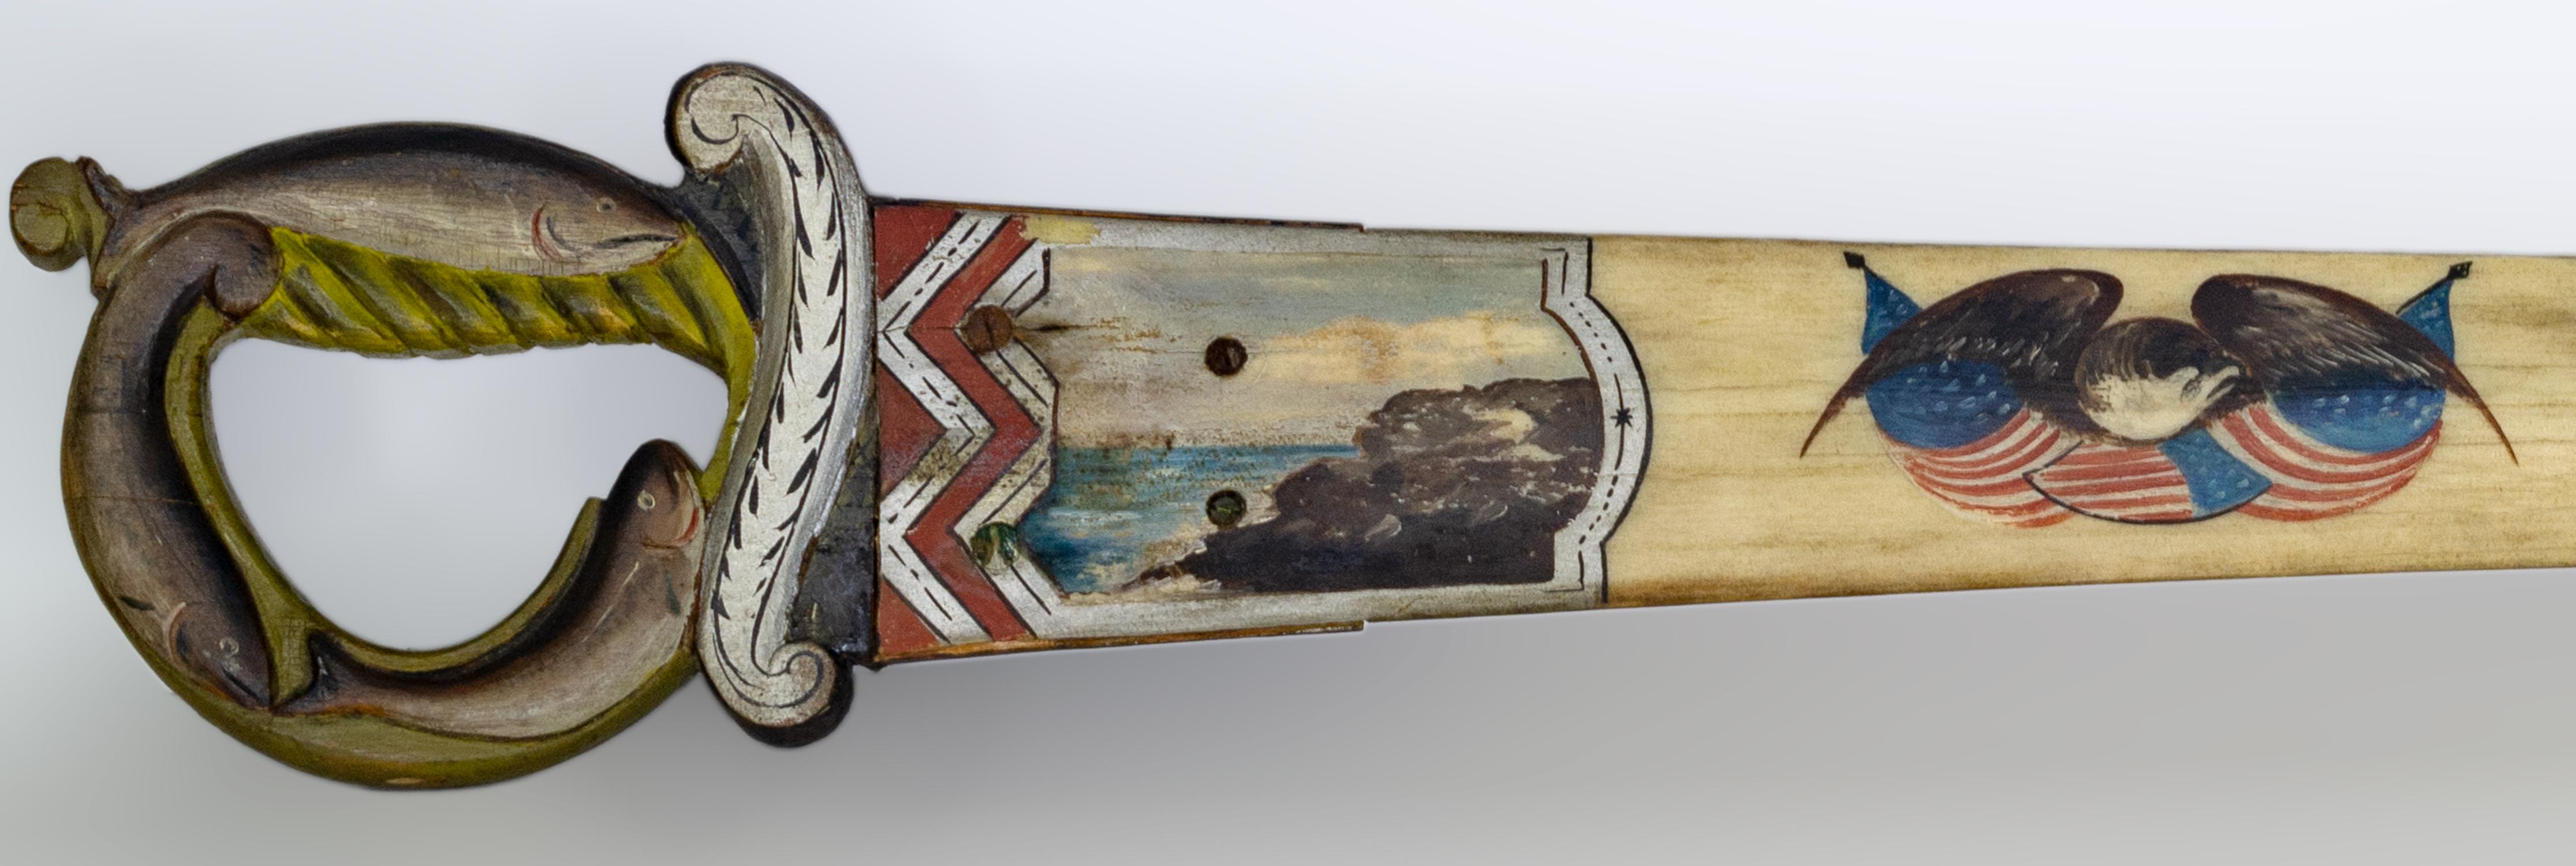 The hilt is painted and relief carved with three fish, and the bill has four vignettes with an eagle, rocky shoreline, swordfish and American shield. The back side is signed and dated 